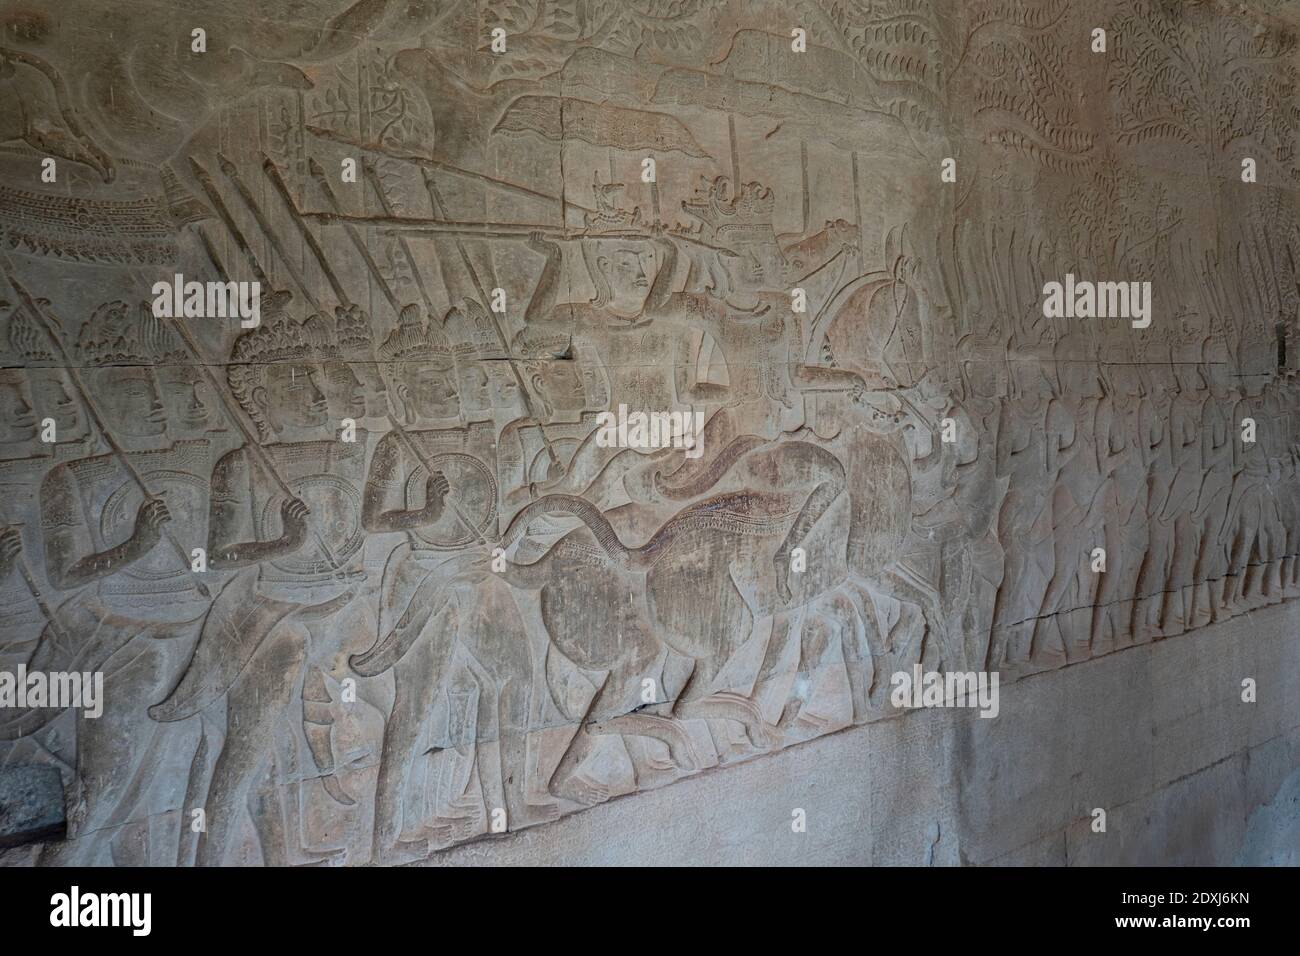 Bas-relief on the walls of Angkor Wat Stock Photo